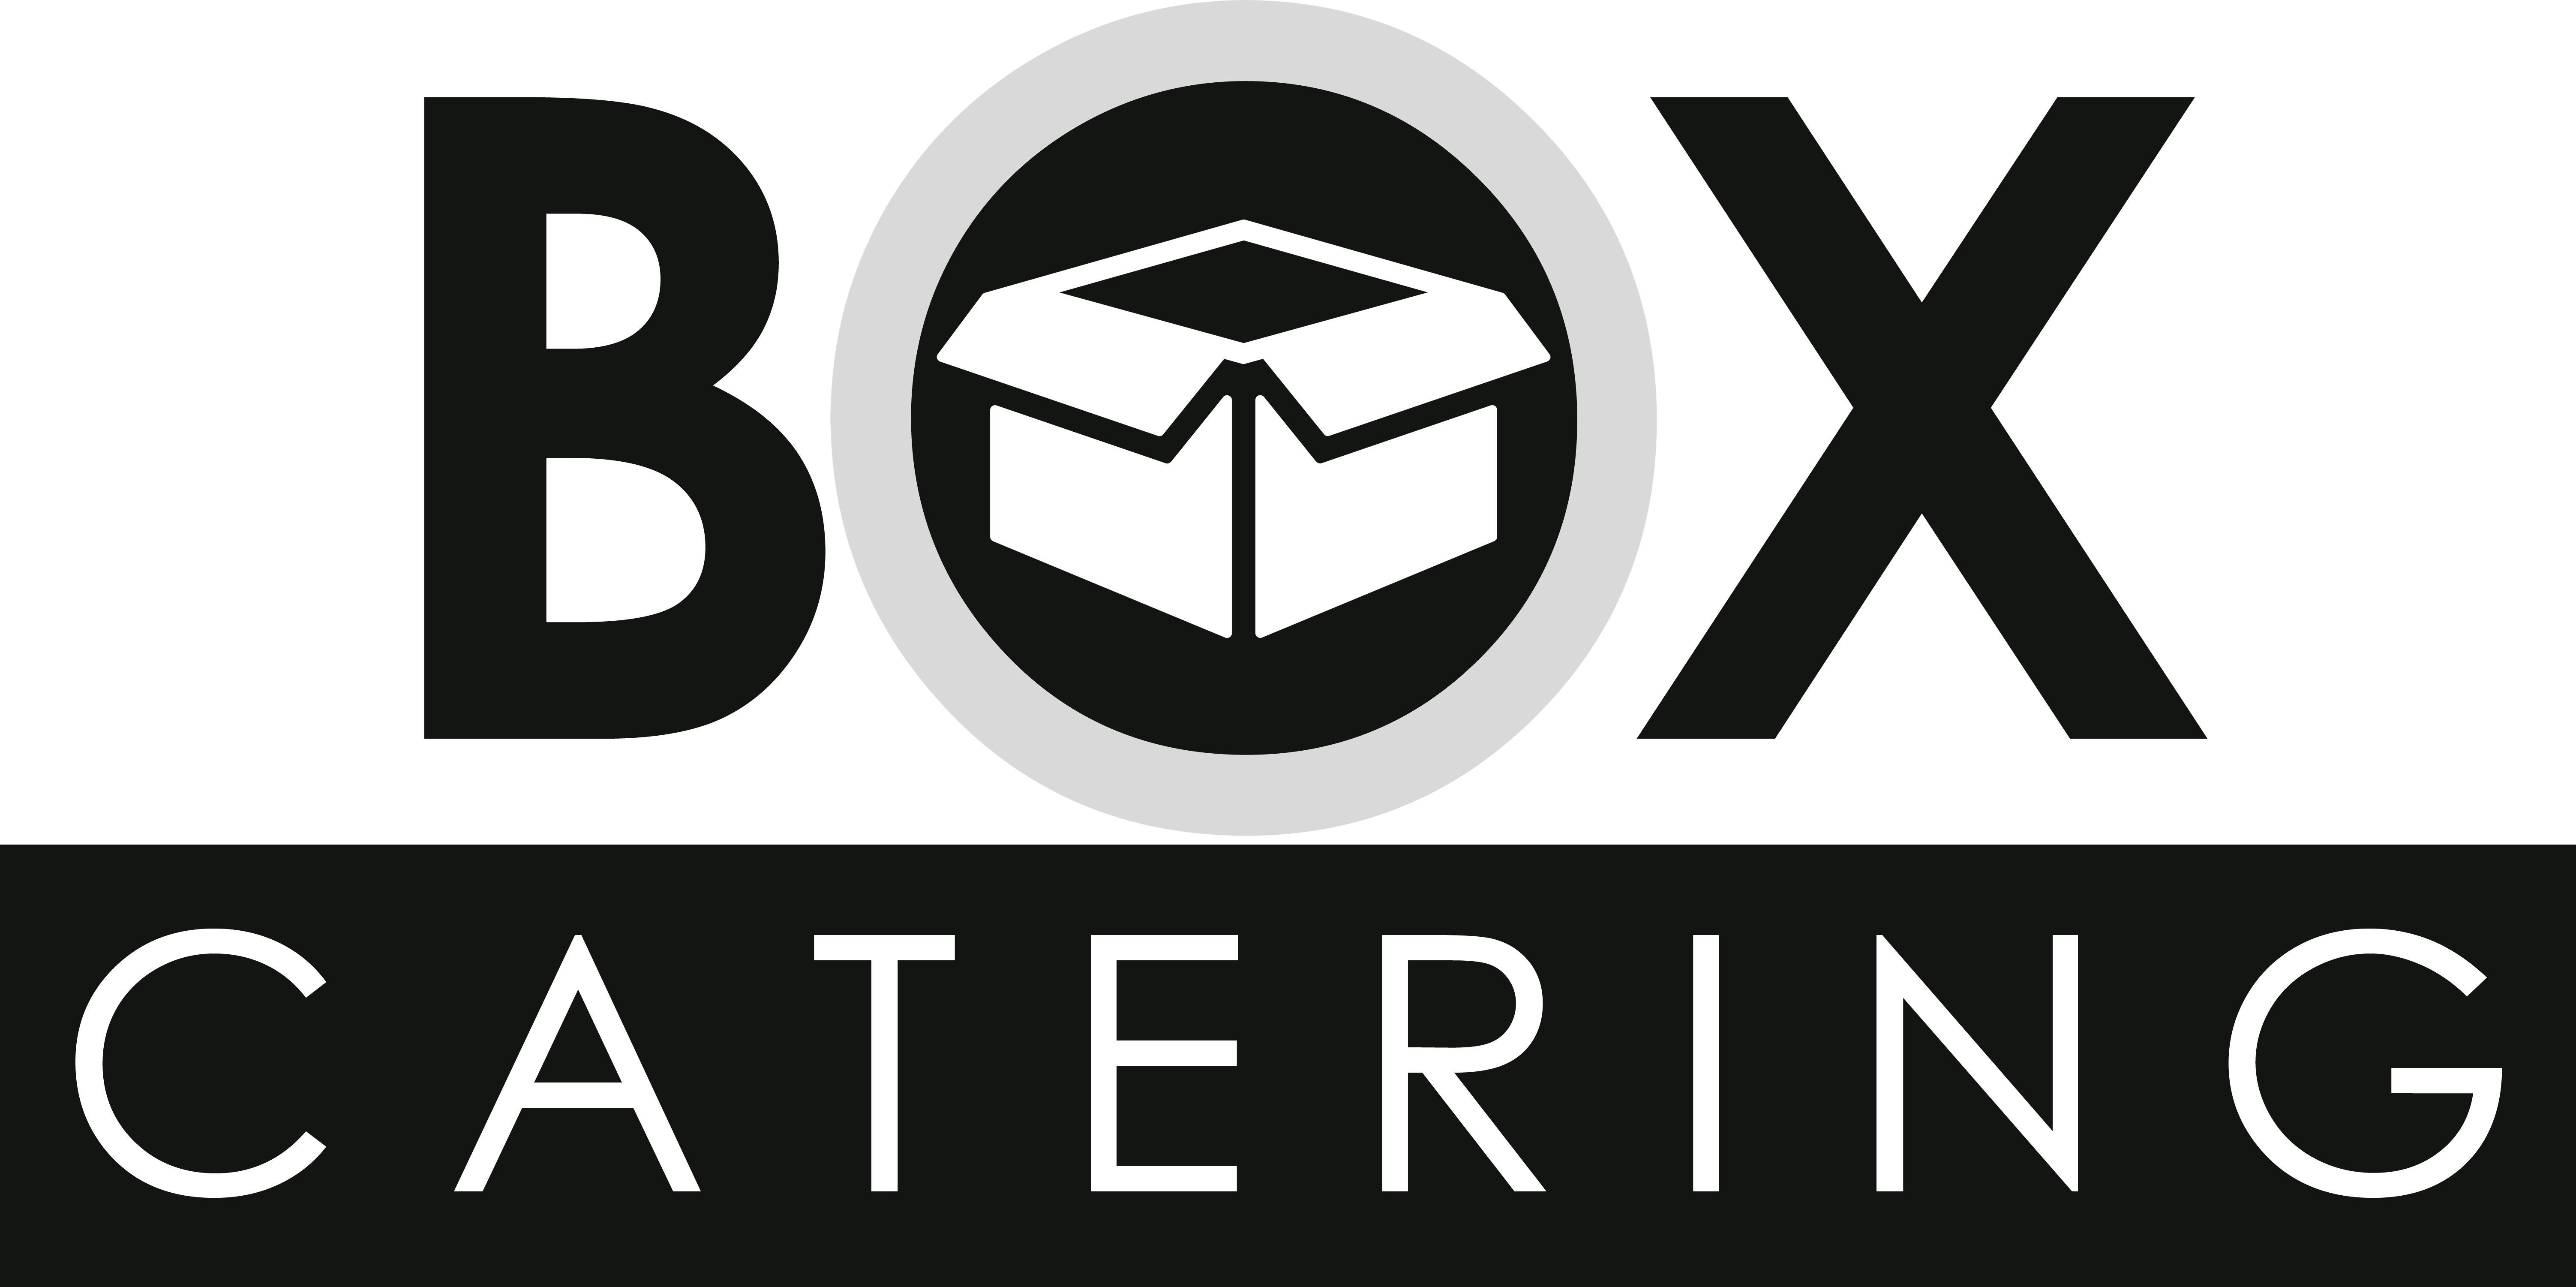 box-catering-logo.png